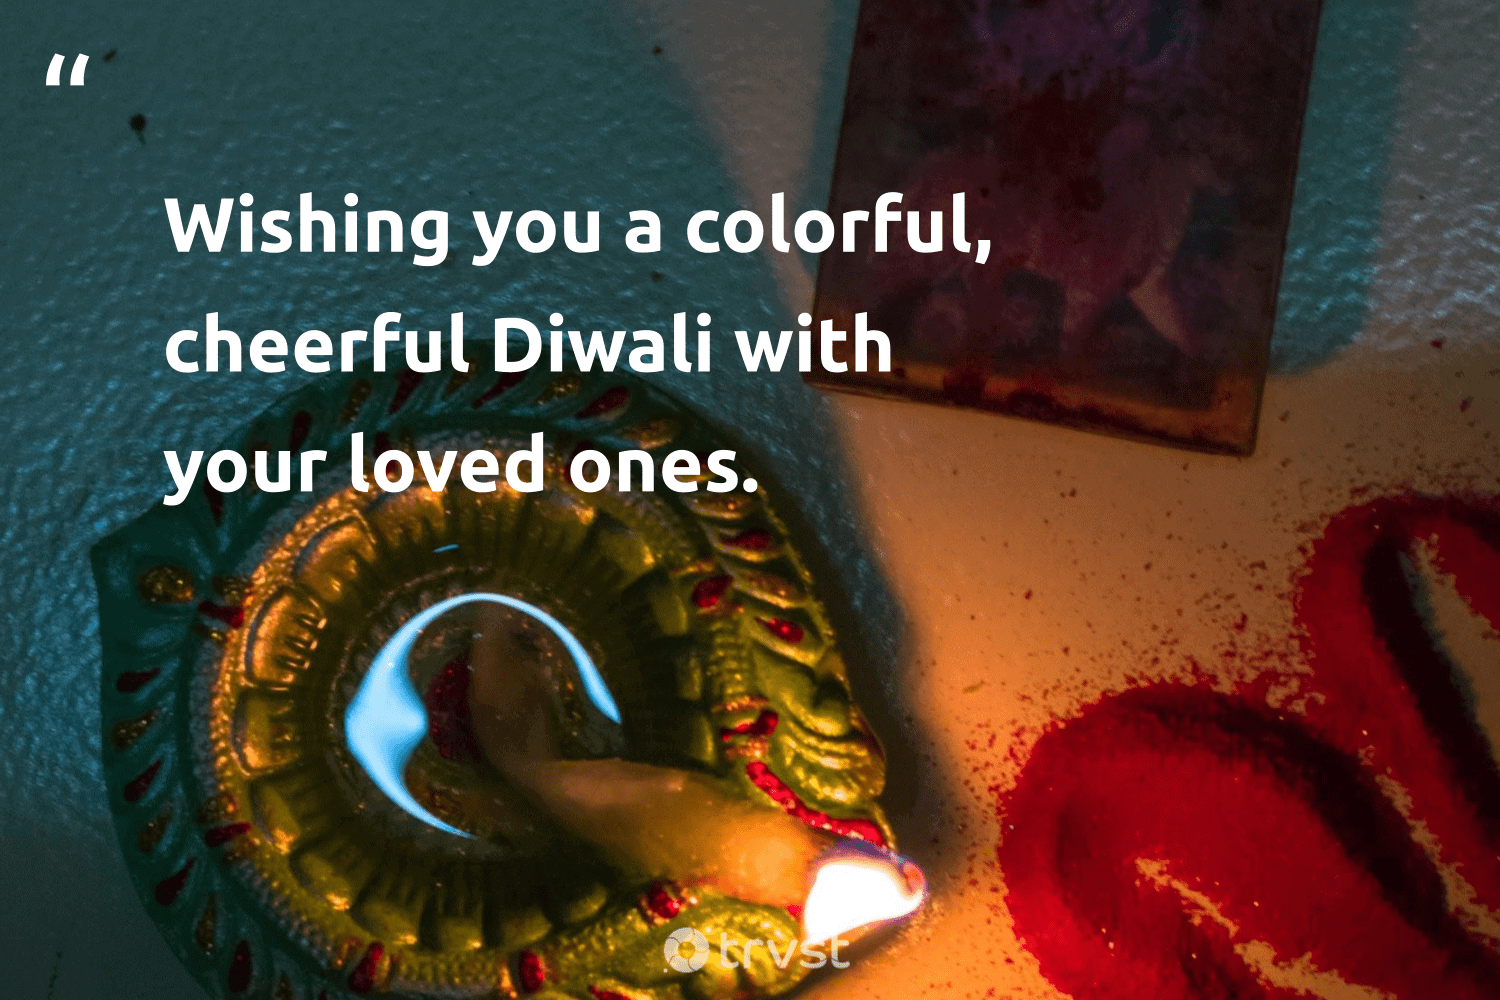 diwali quotes wishing you a colorful ch 6151